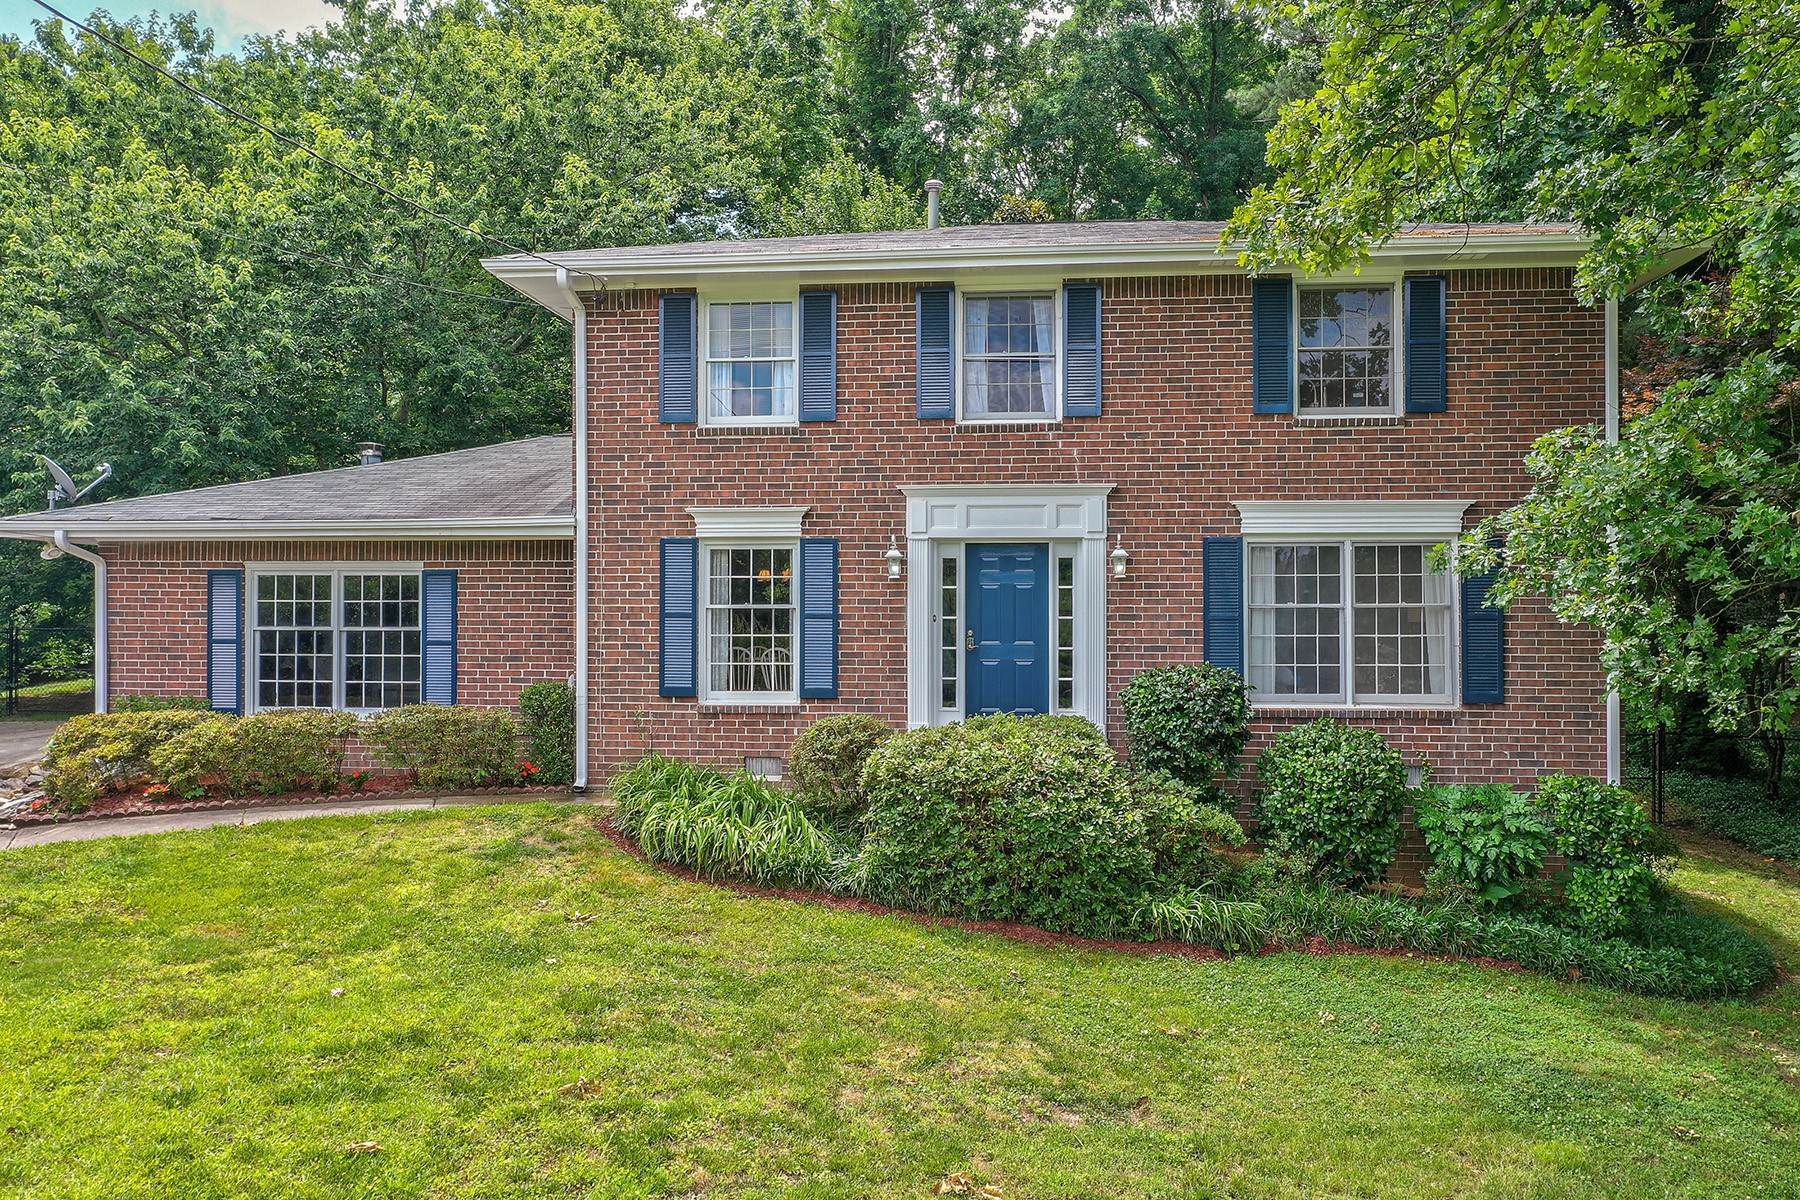 Single Family Homes for Sale at Traditional Brick Home in Peachtree Corners/Dunwoody 3701 Geraldine Court Peachtree Corners, Georgia 30360 United States